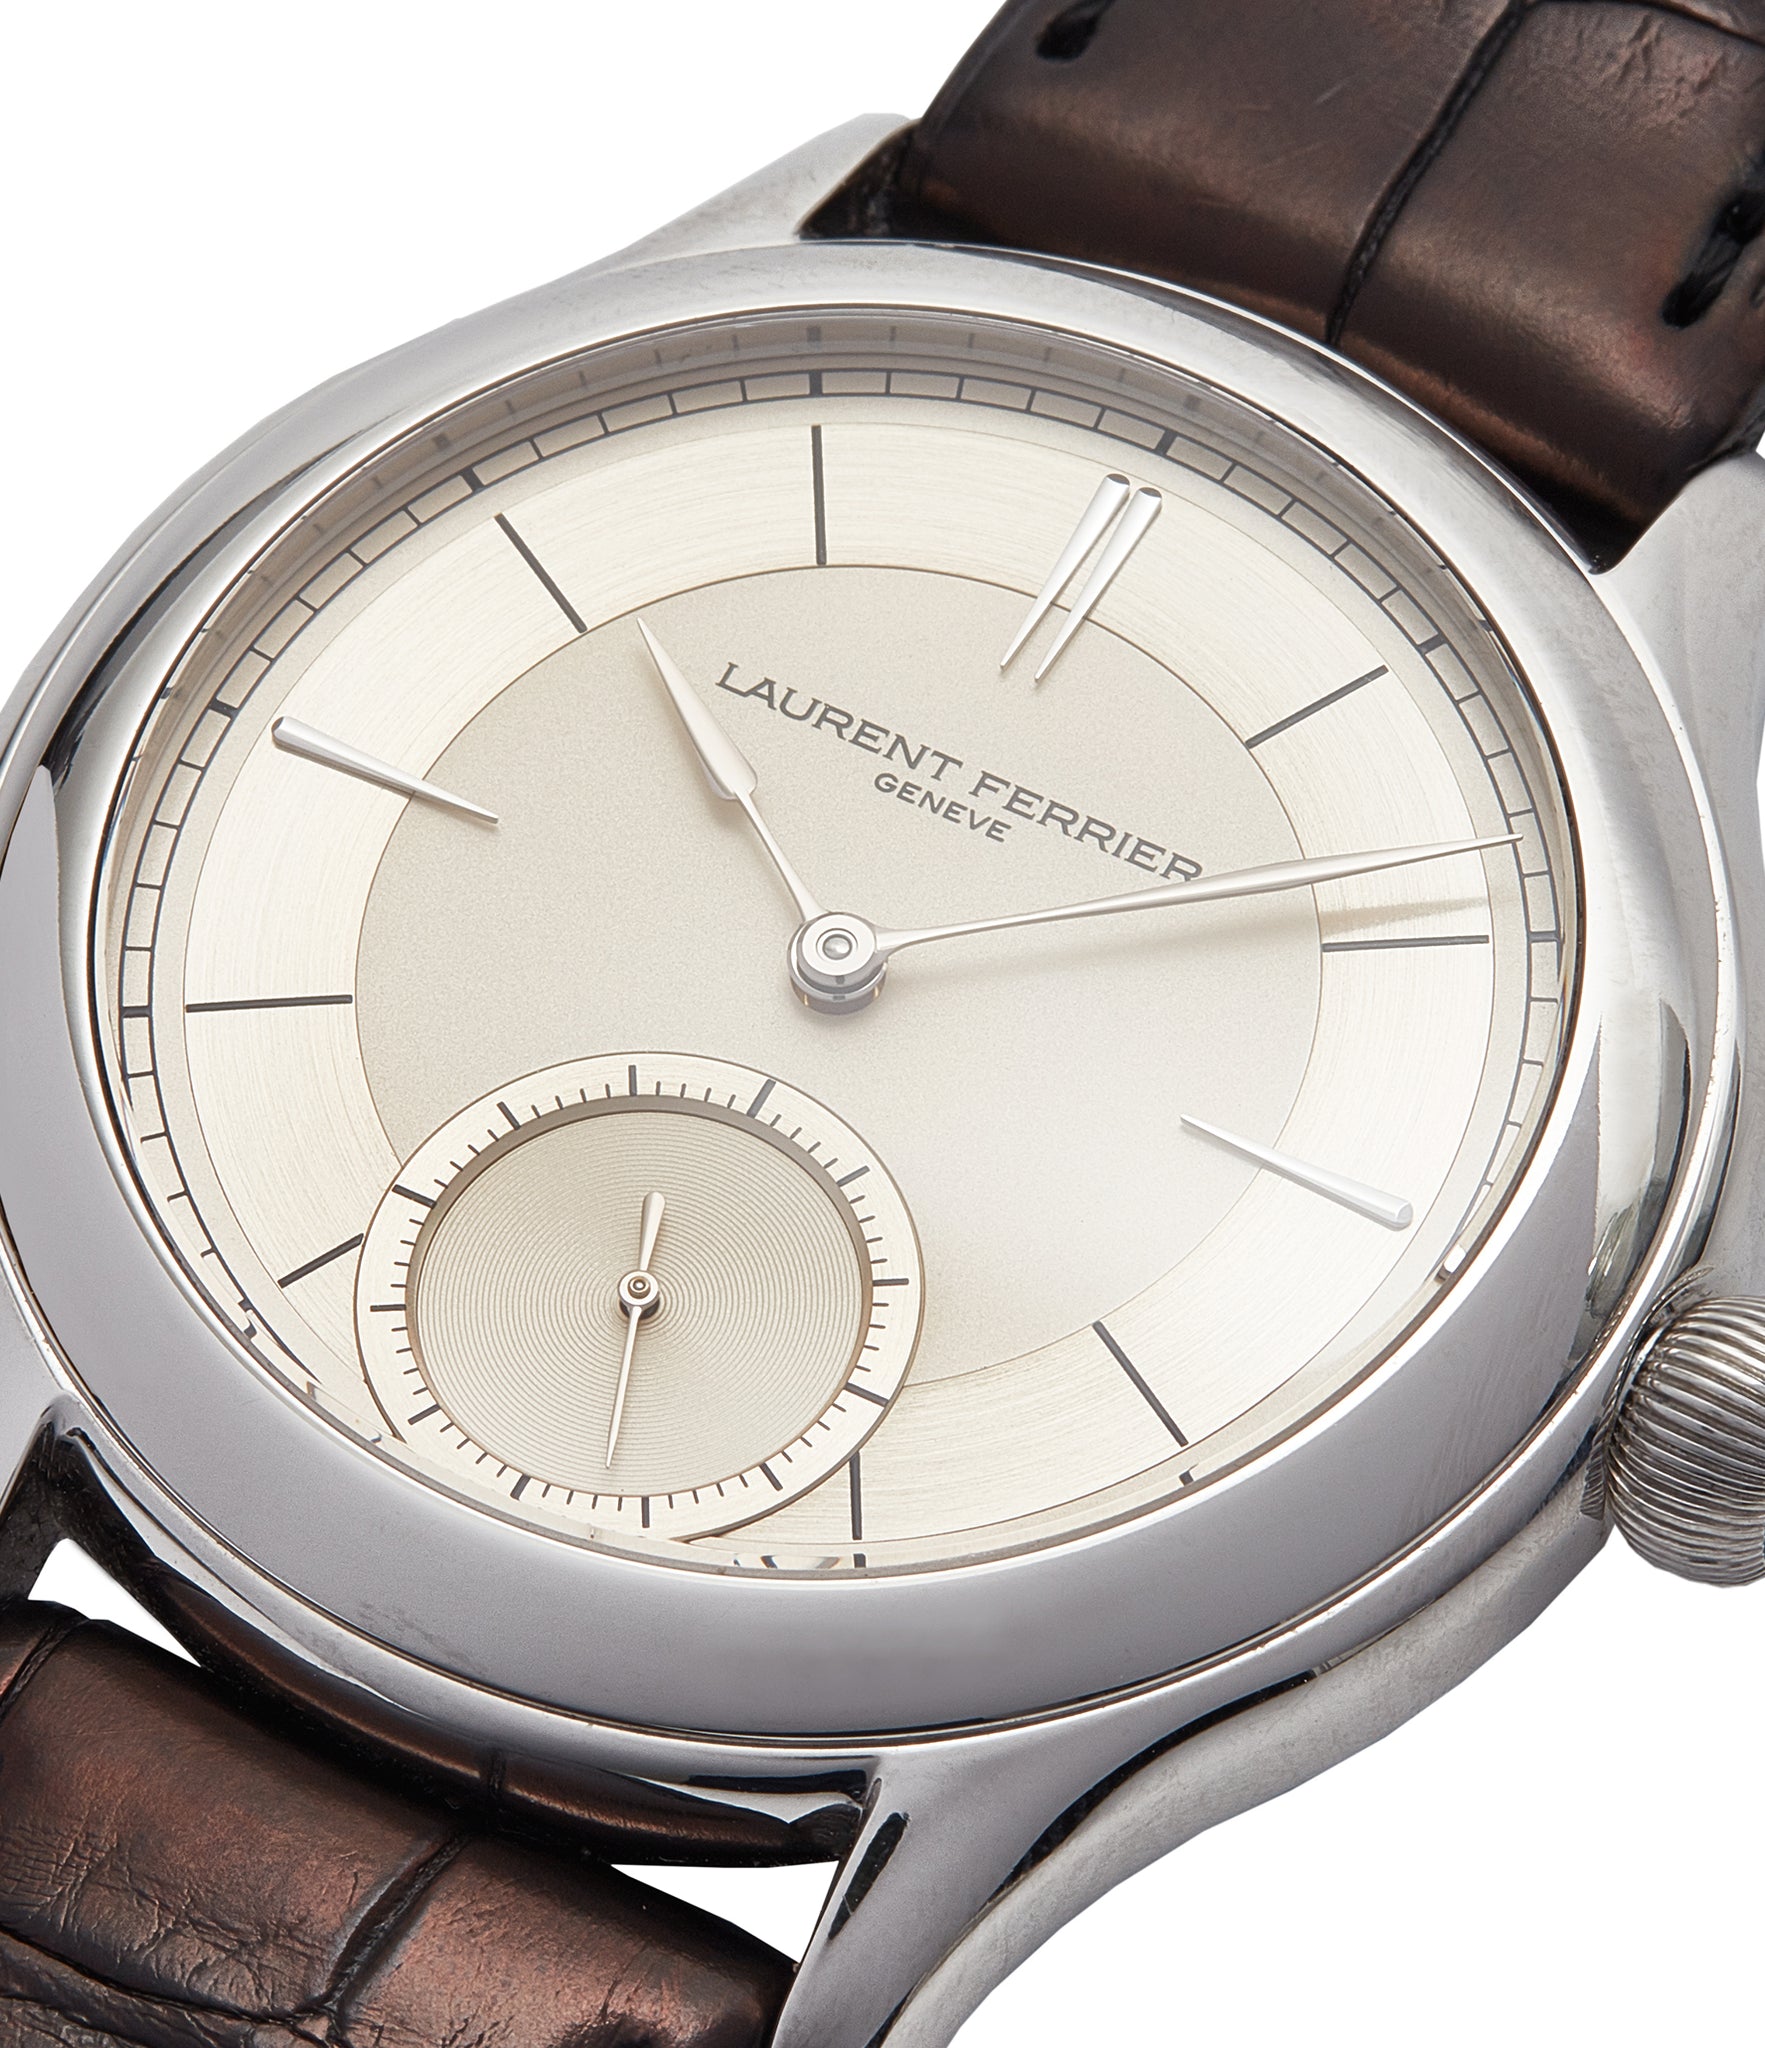 piece unique Laurent Ferrier Galet Micro-rotor 40 mm platinum time-only dress watch from independent watchmaker for sale online at A Collected Man London UK specialist of rare watches